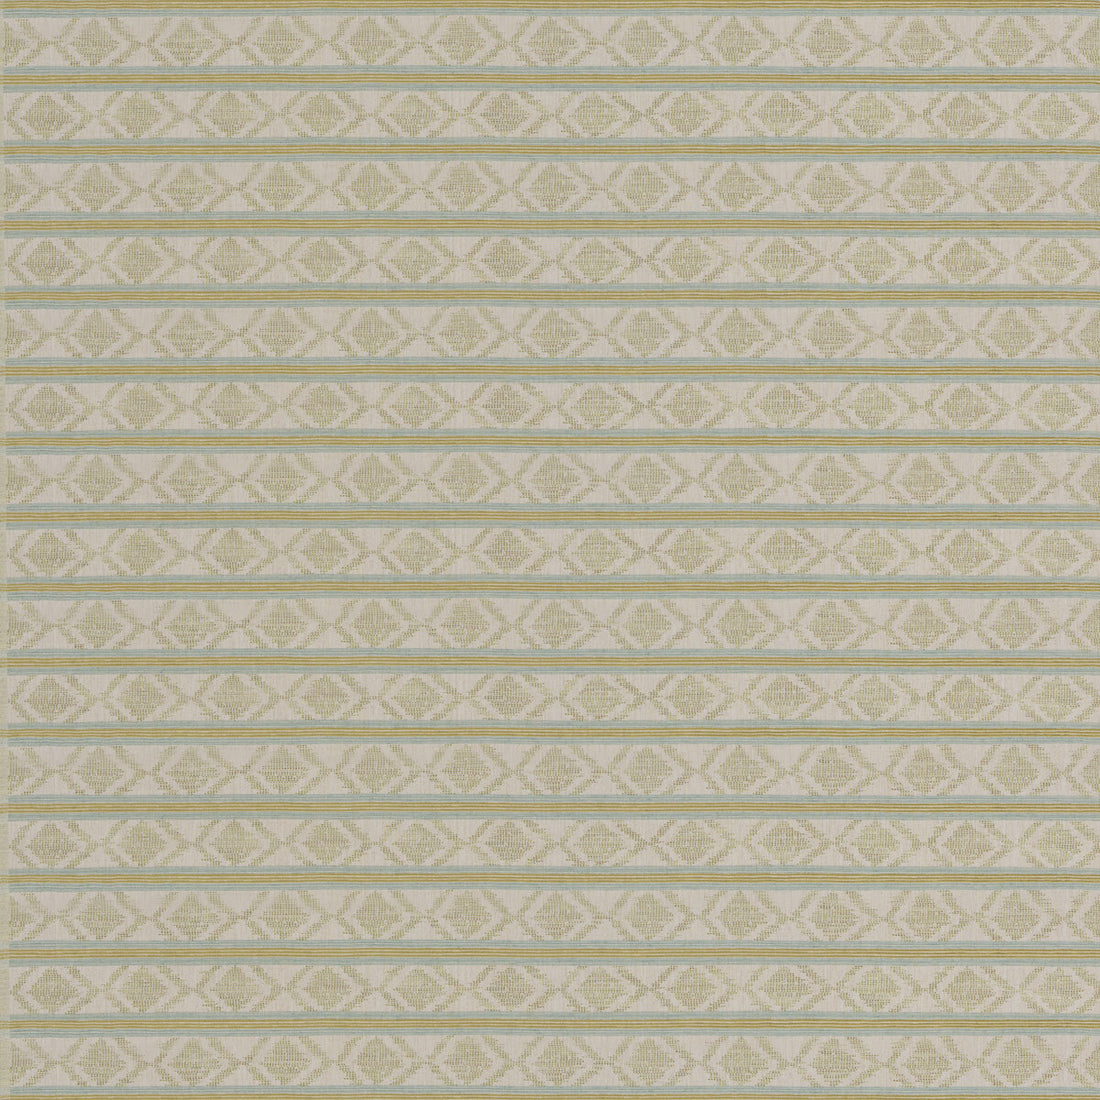 Burford Stripe fabric in aqua/green color - pattern BF11034.4.0 - by G P &amp; J Baker in the Burford Weaves collection